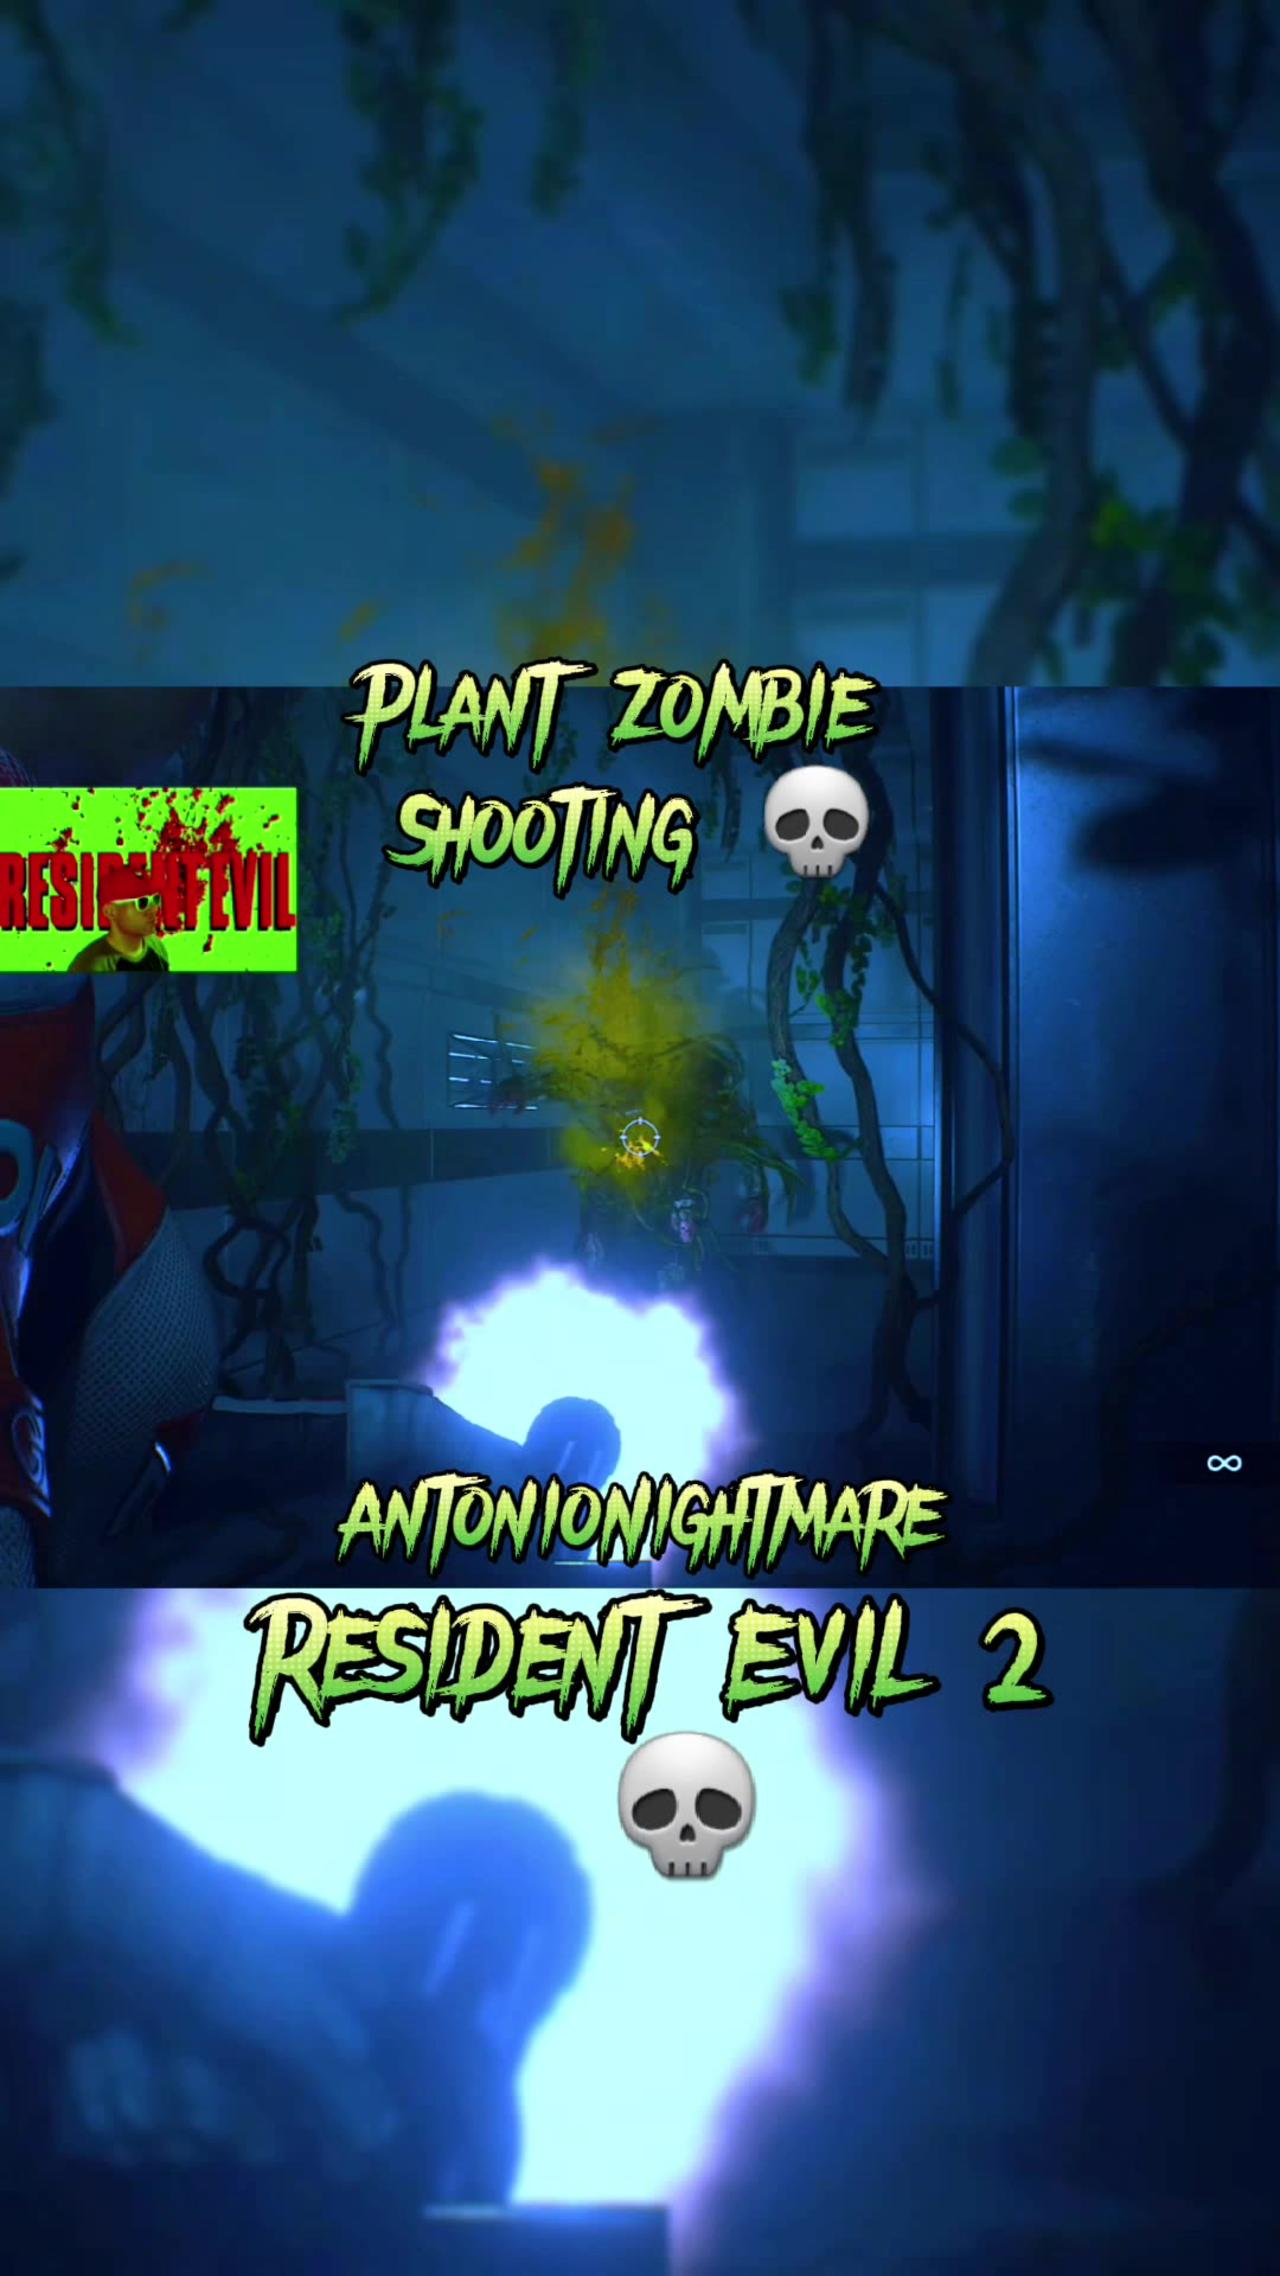 Resident Evil 2 - Plant Zombie vs Claire Redfield 💀 Undead Shooting. Gameplay from Playstation 5